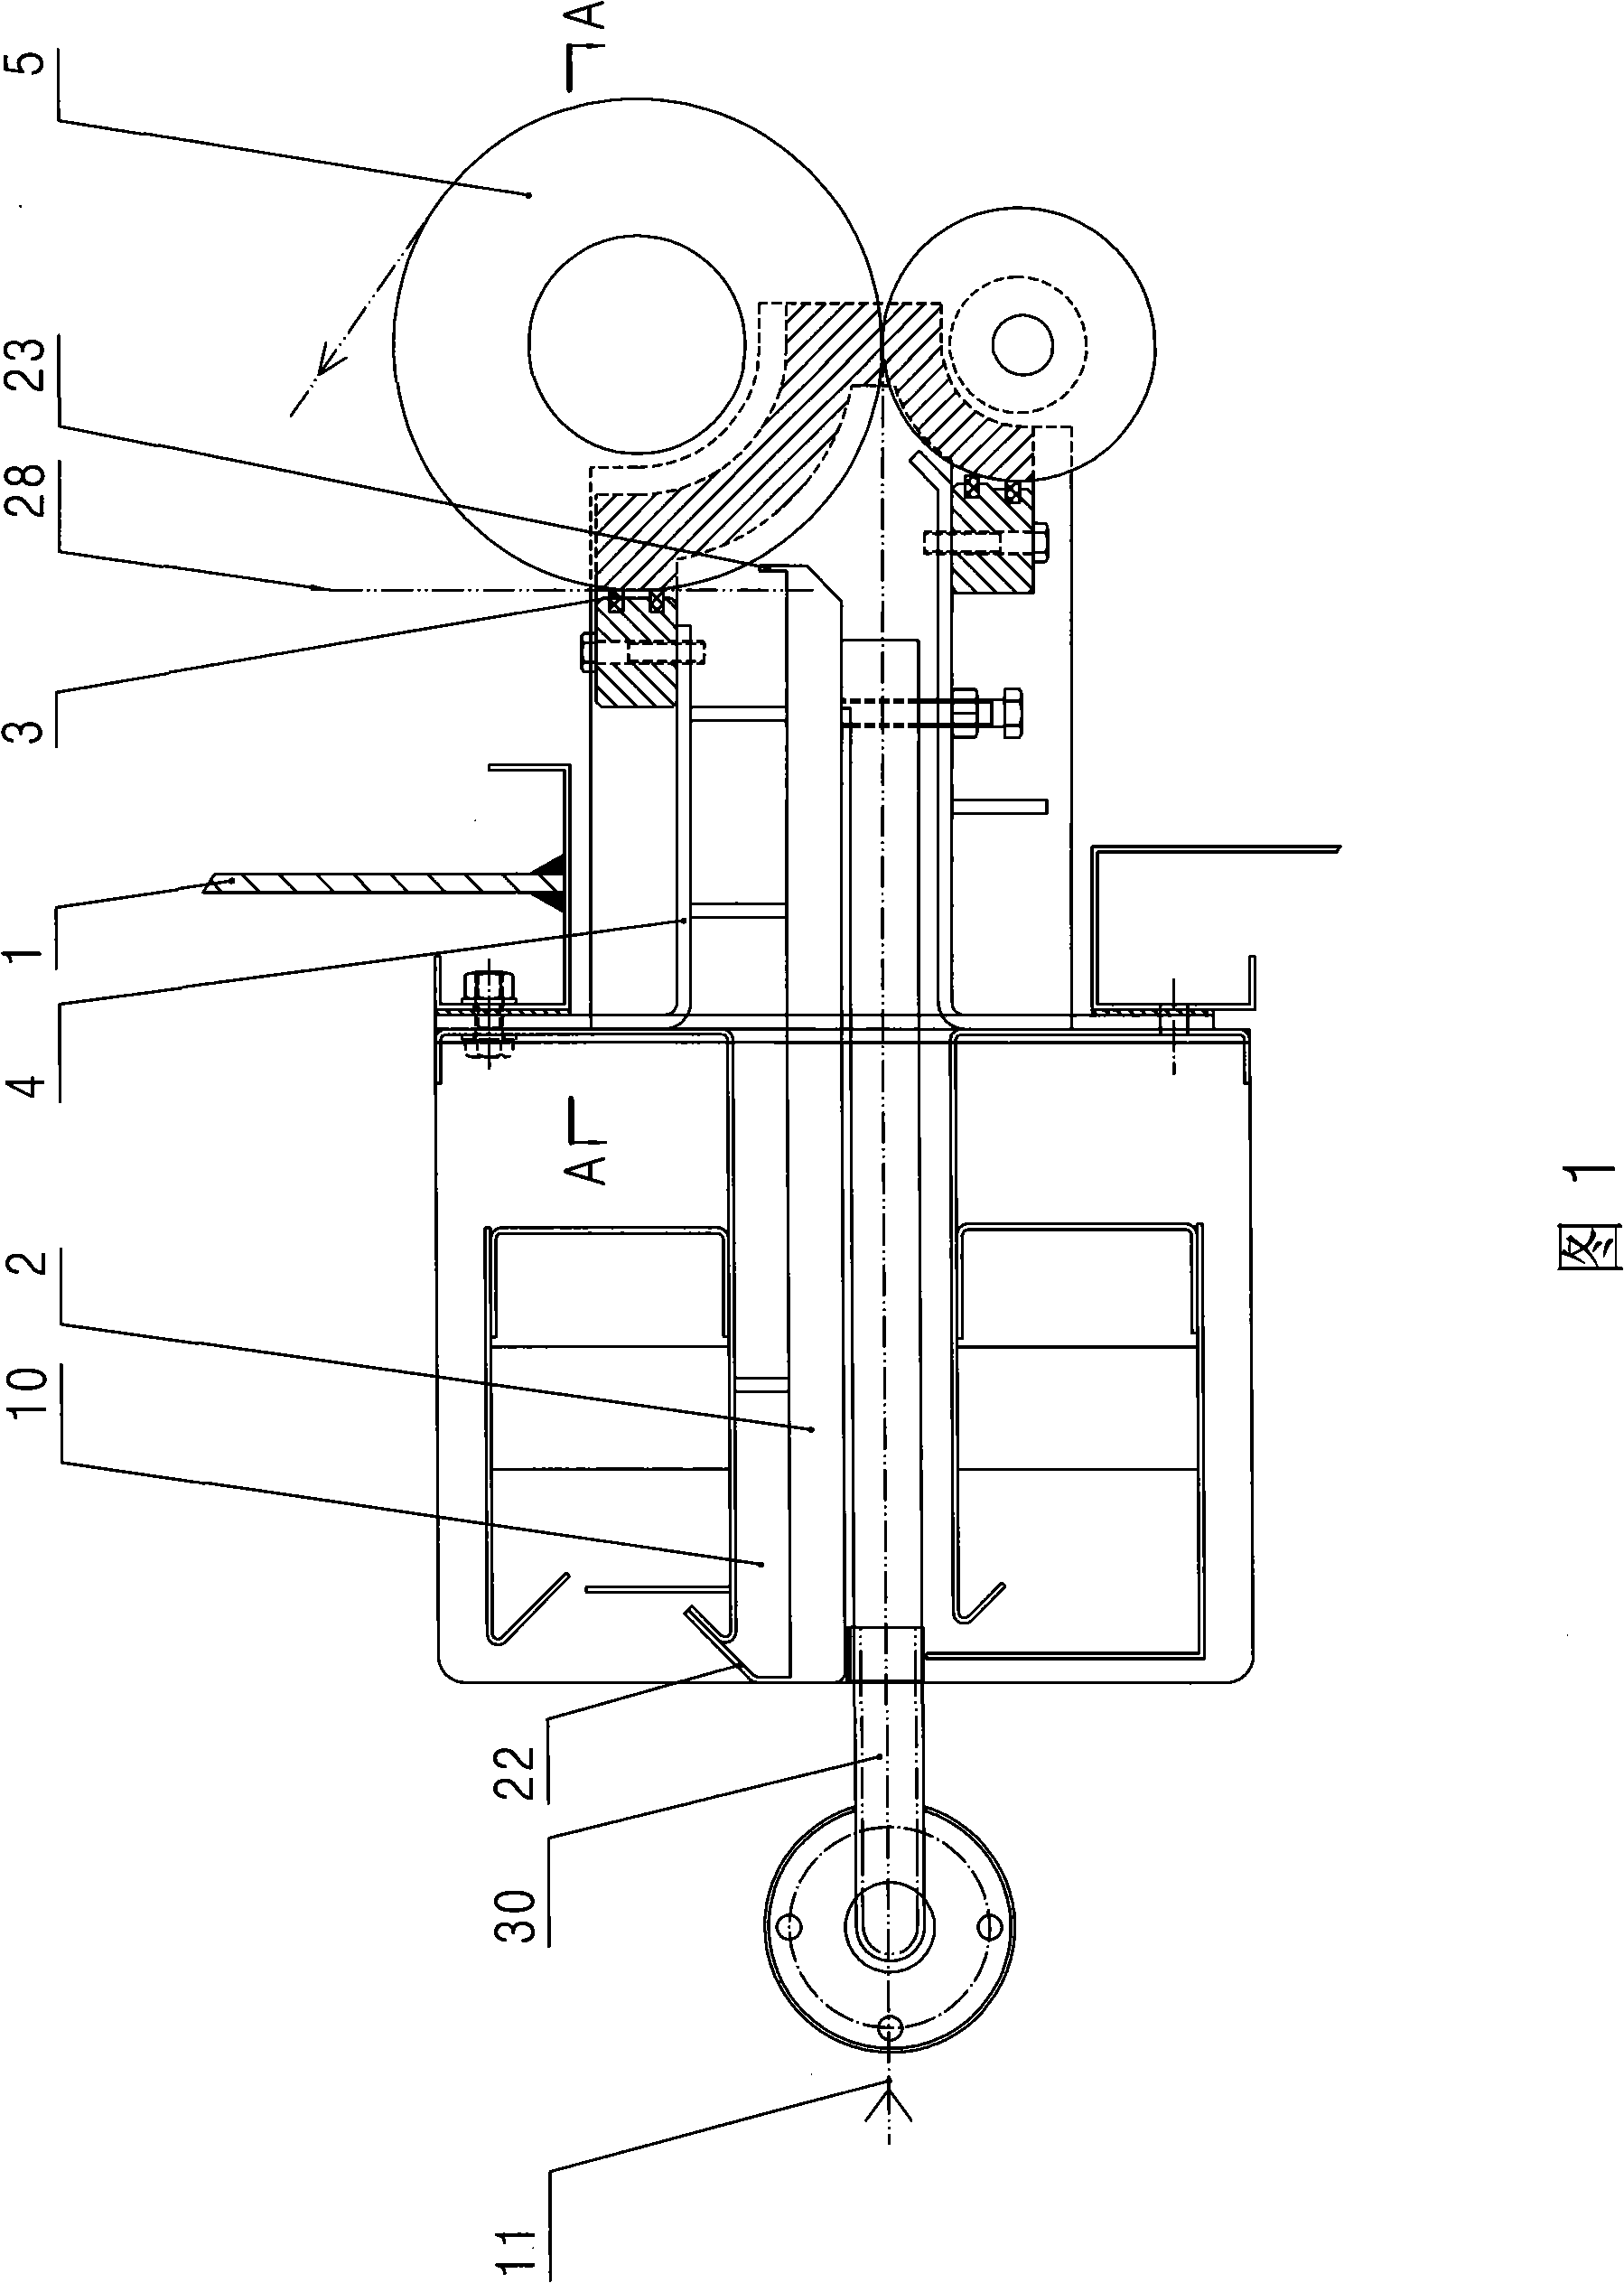 Steam chamber cloth feeding port dripping-proof device